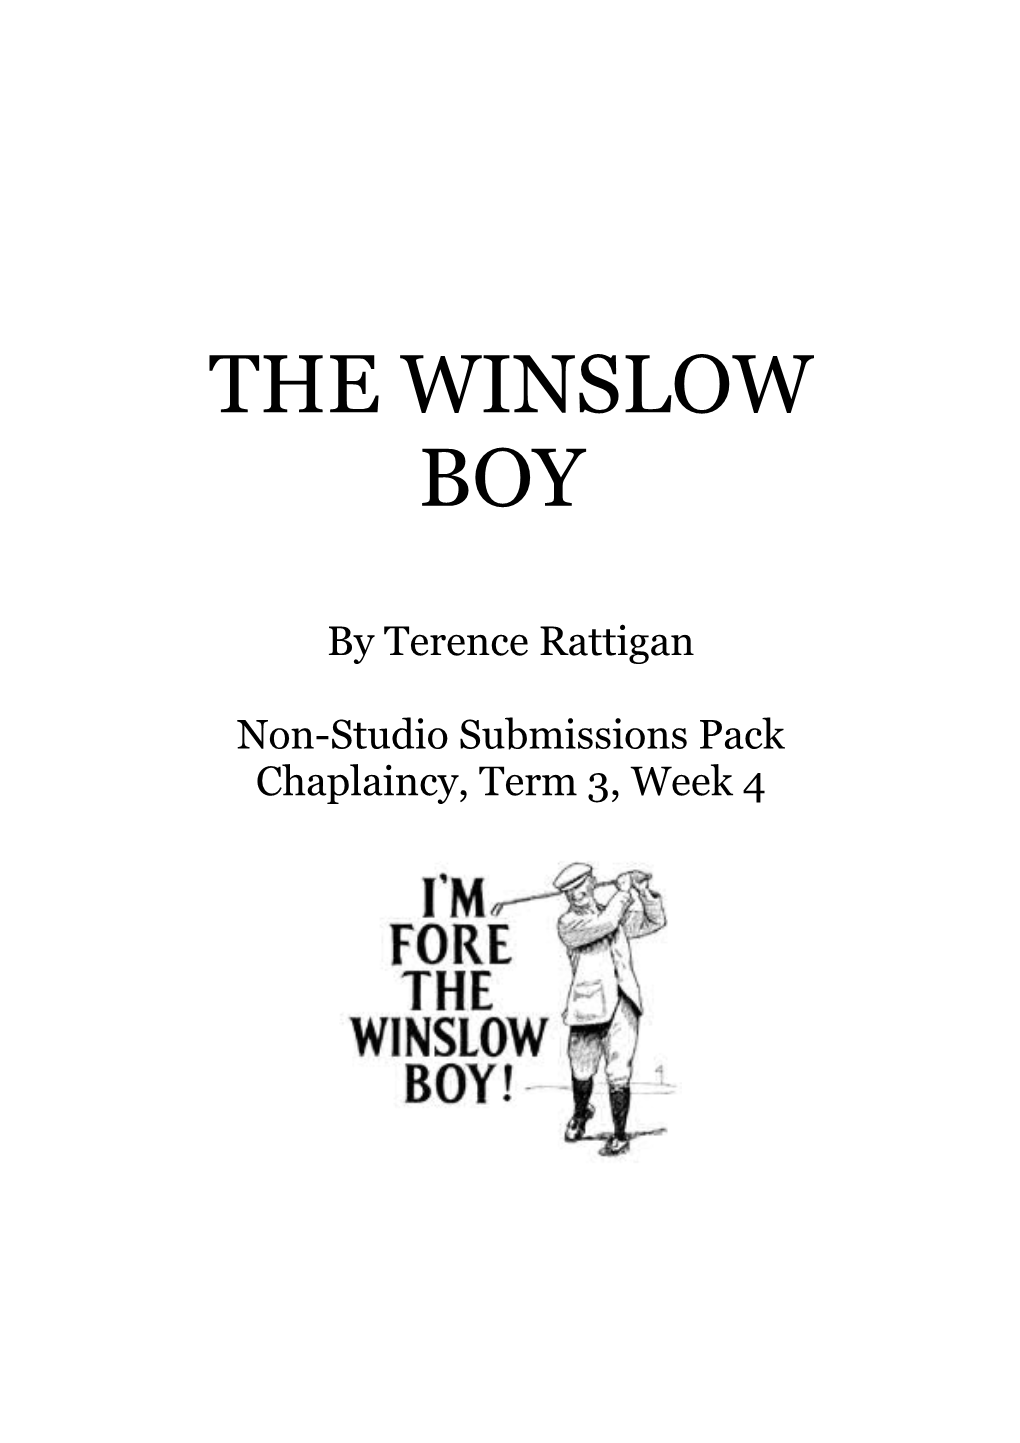 THE WINSLOW BOY- by Terence Rattigan